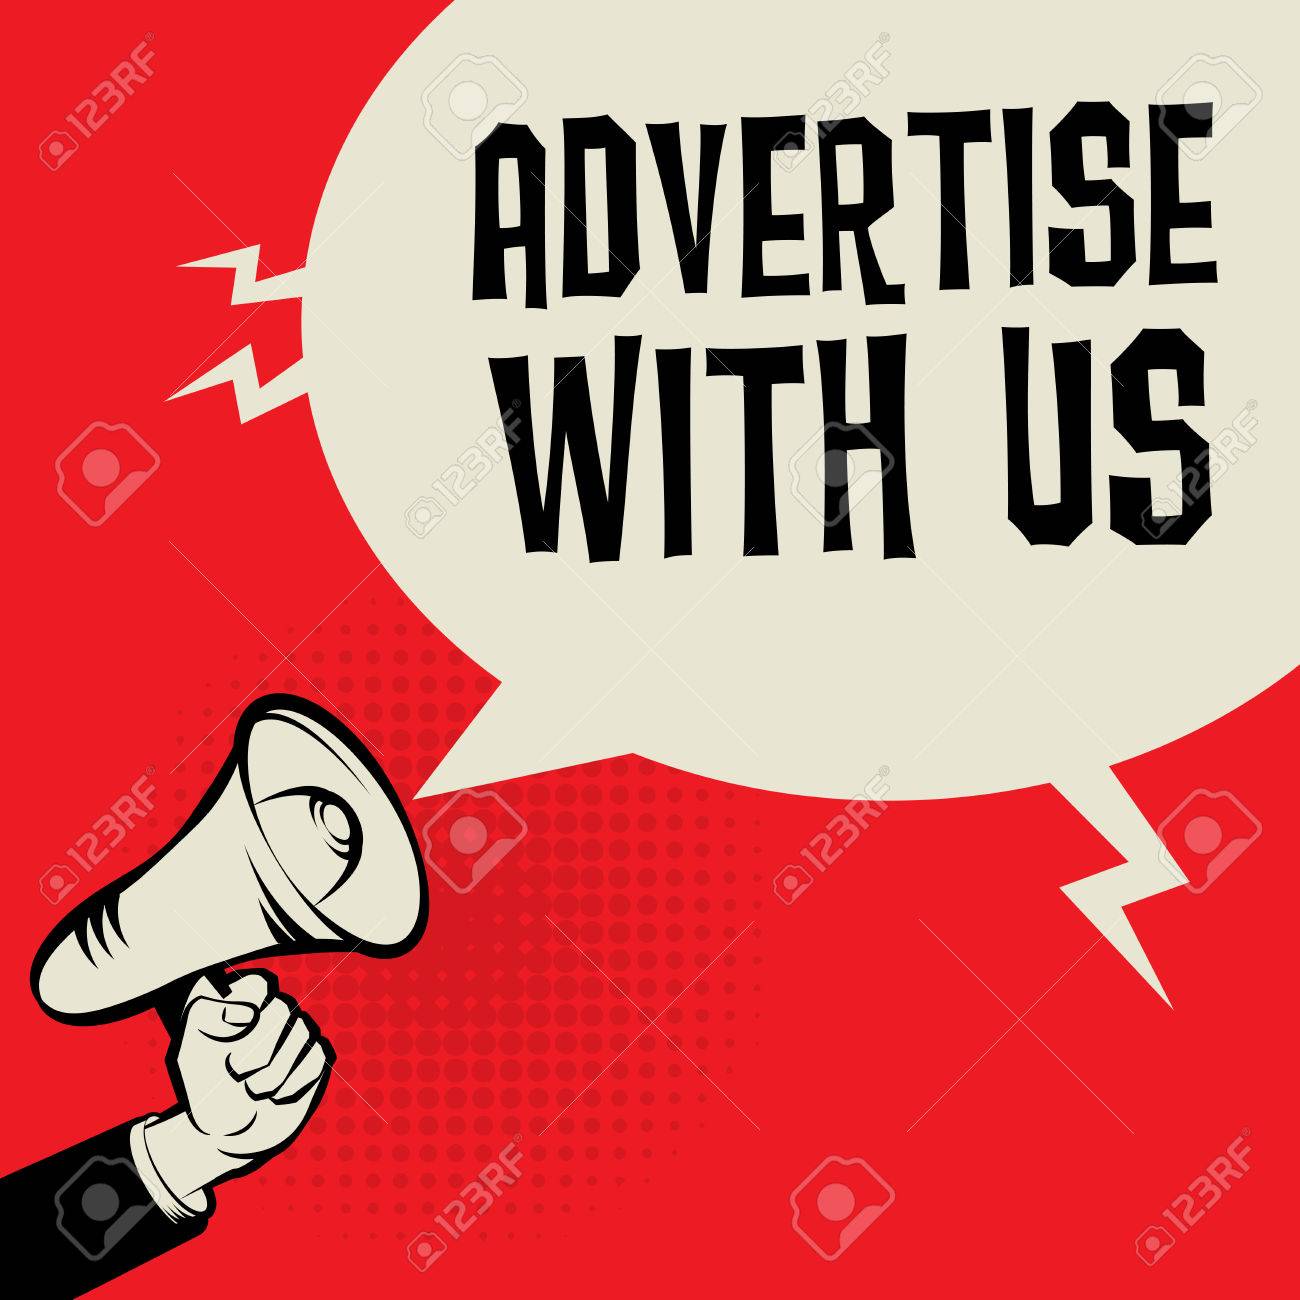 Advertise with us rasra.in